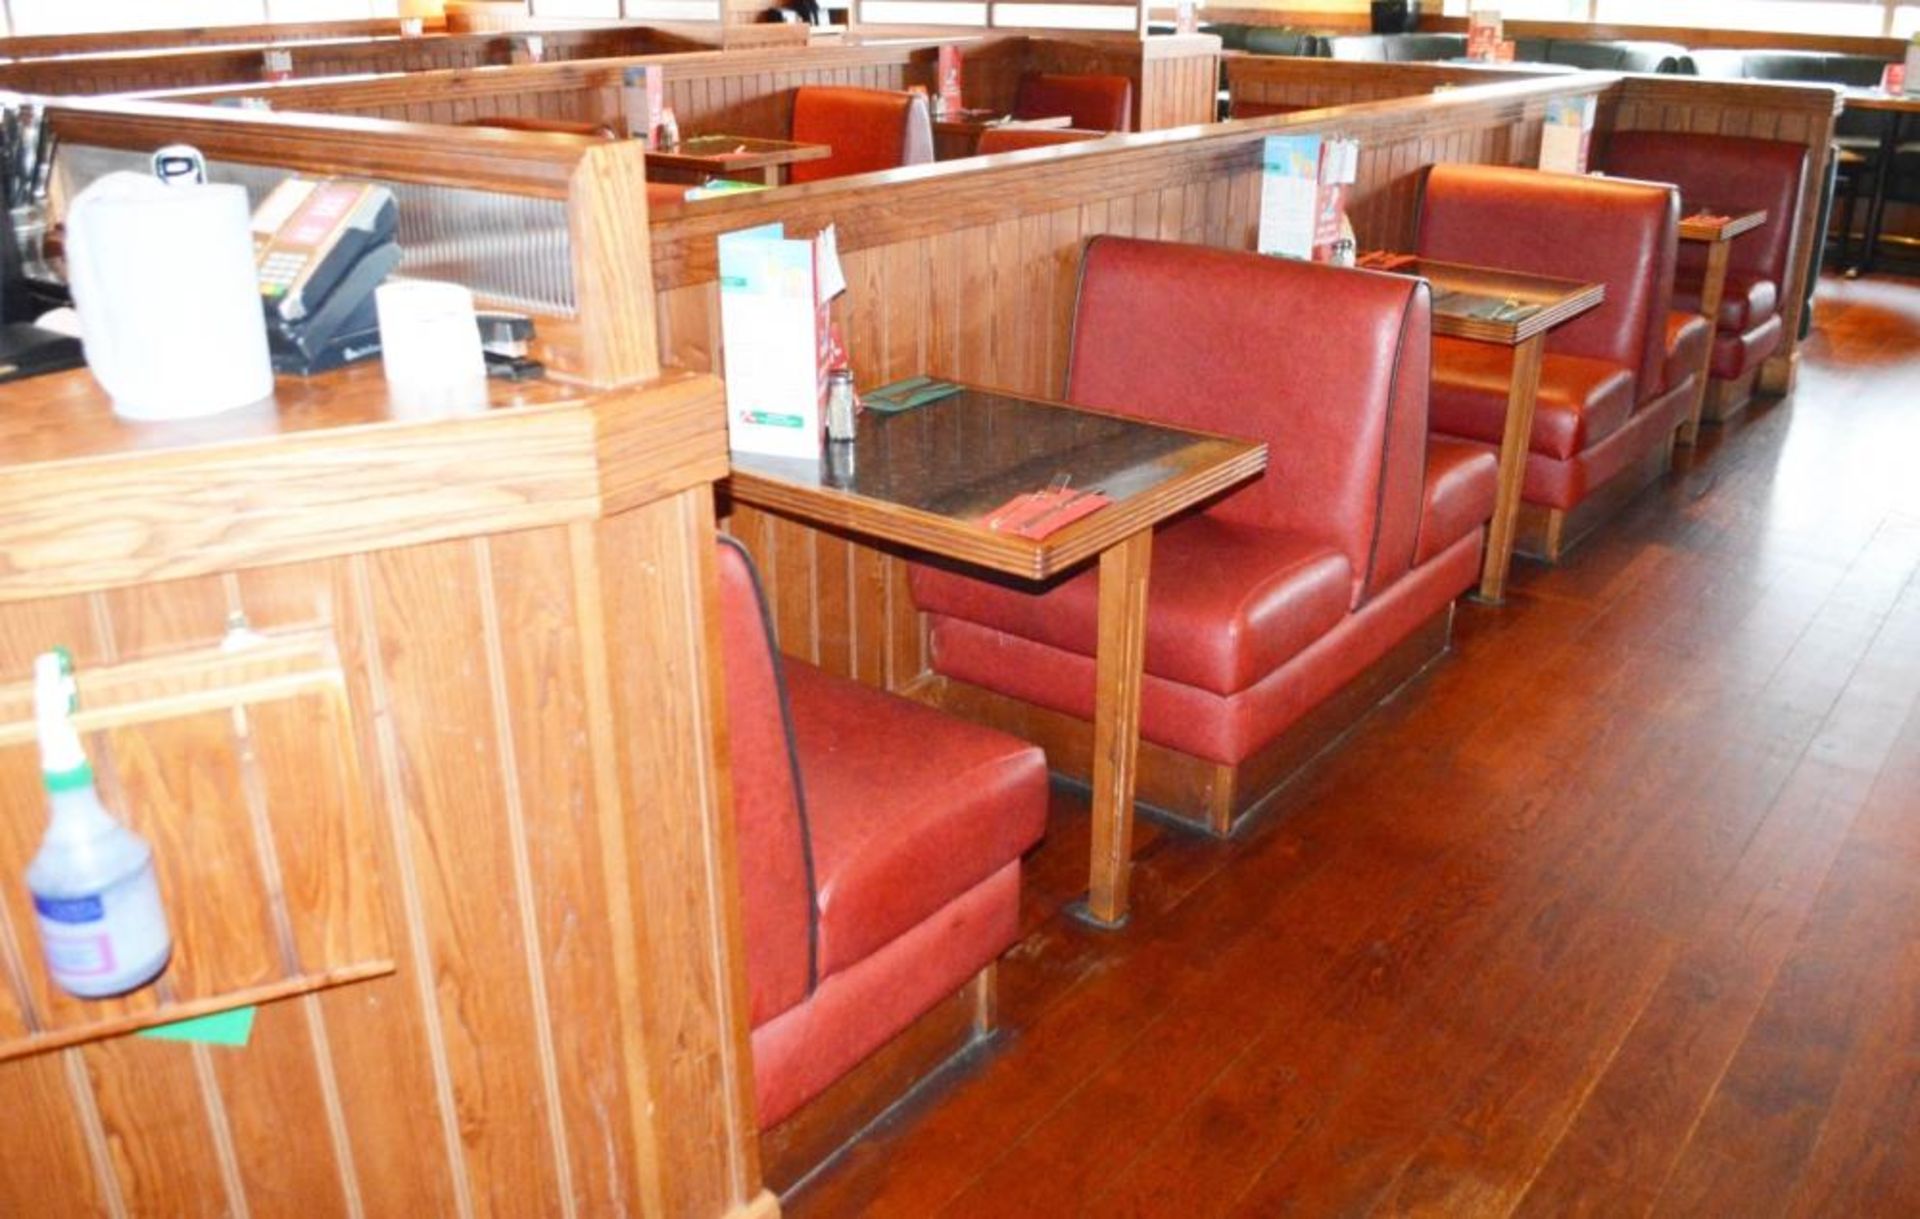 1 x Selection of Cosy Bespoke Seating Booths in a 1950's Retro American Diner Design With Dining Tab - Image 7 of 30